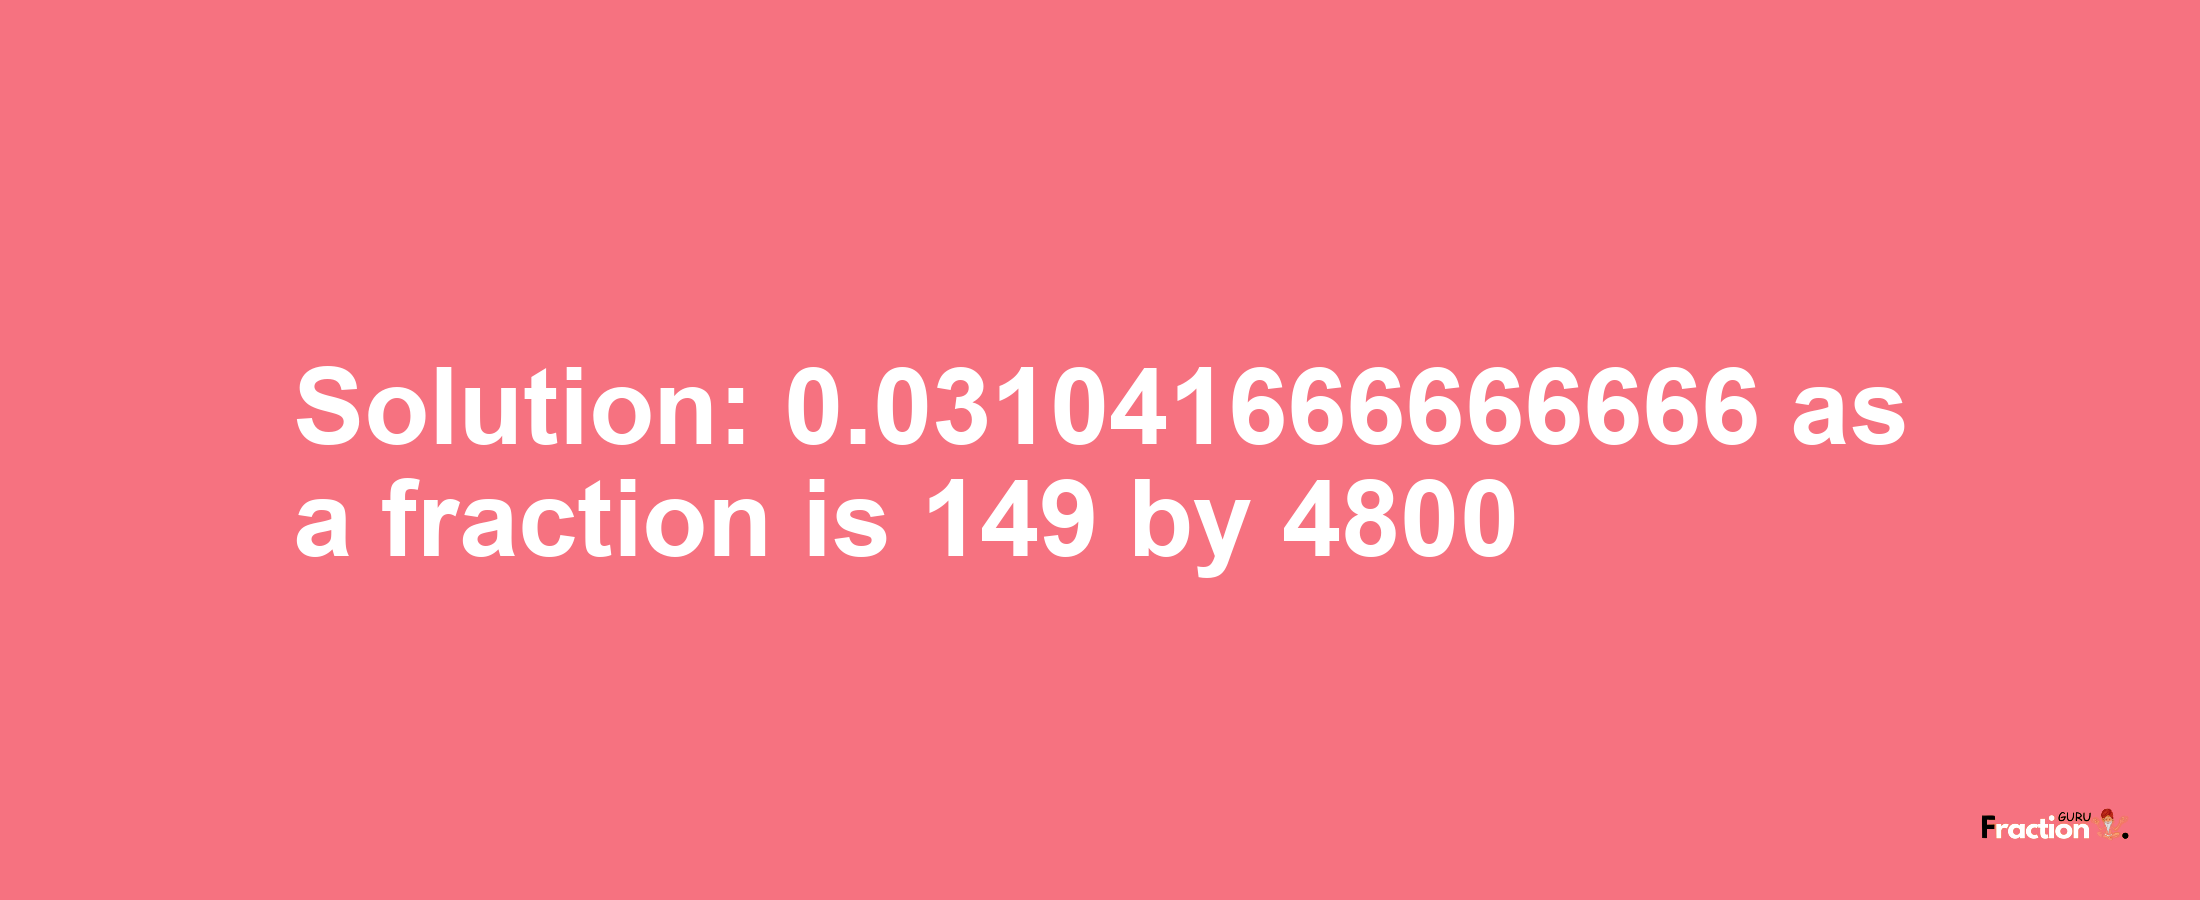 Solution:0.031041666666666 as a fraction is 149/4800